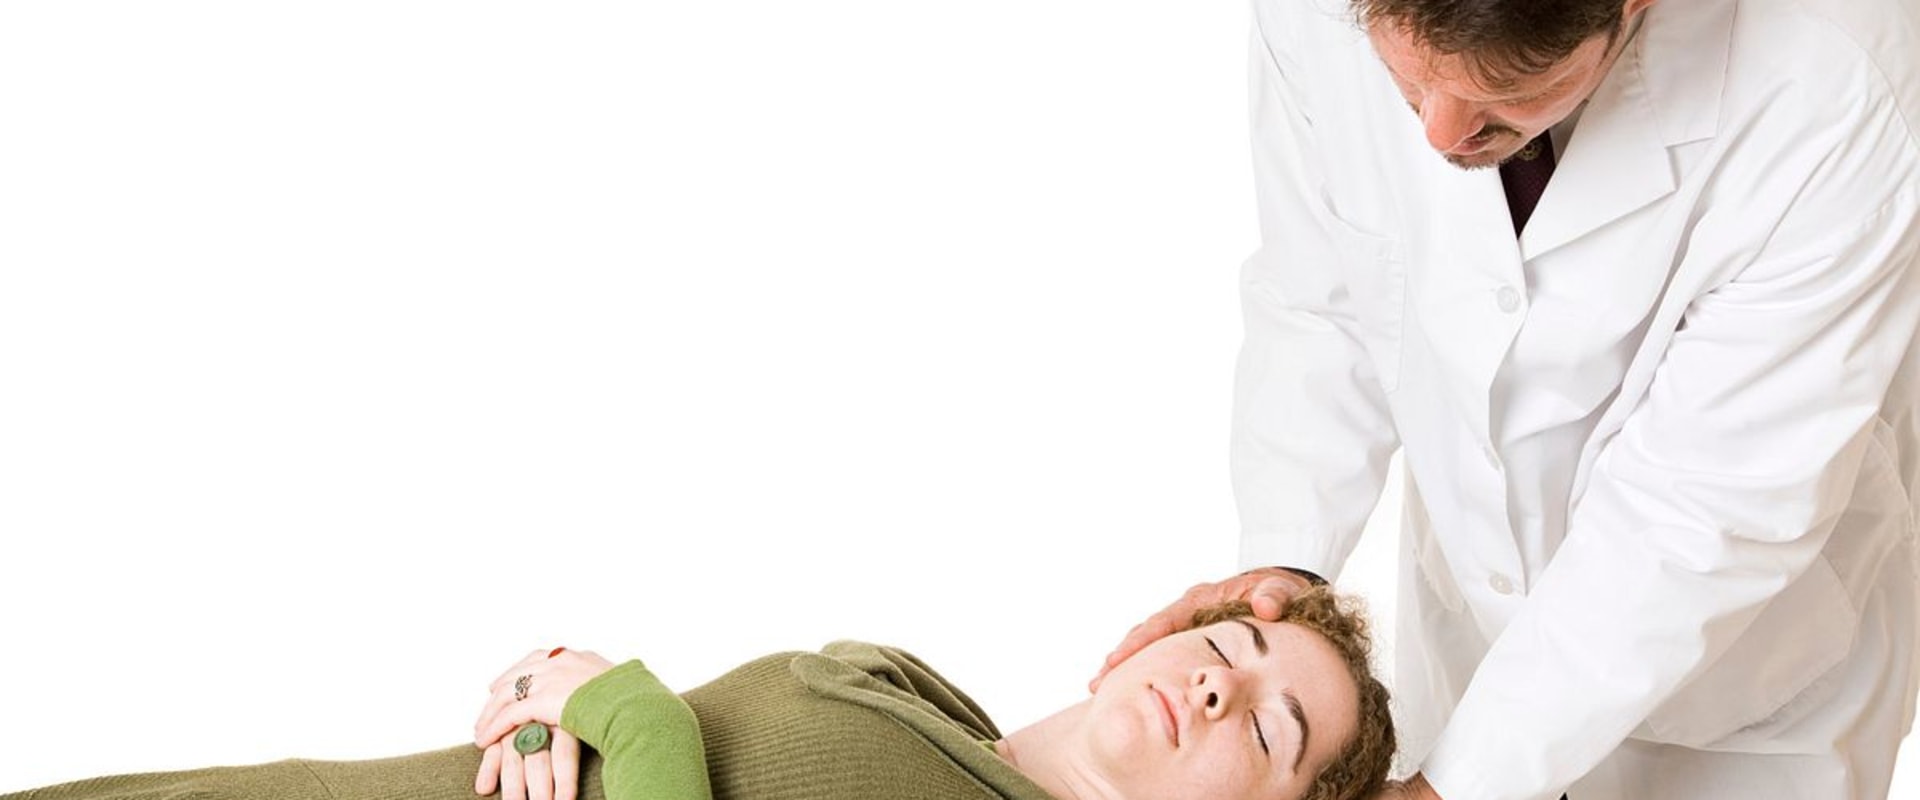 How do you know if chiropractic care is working?